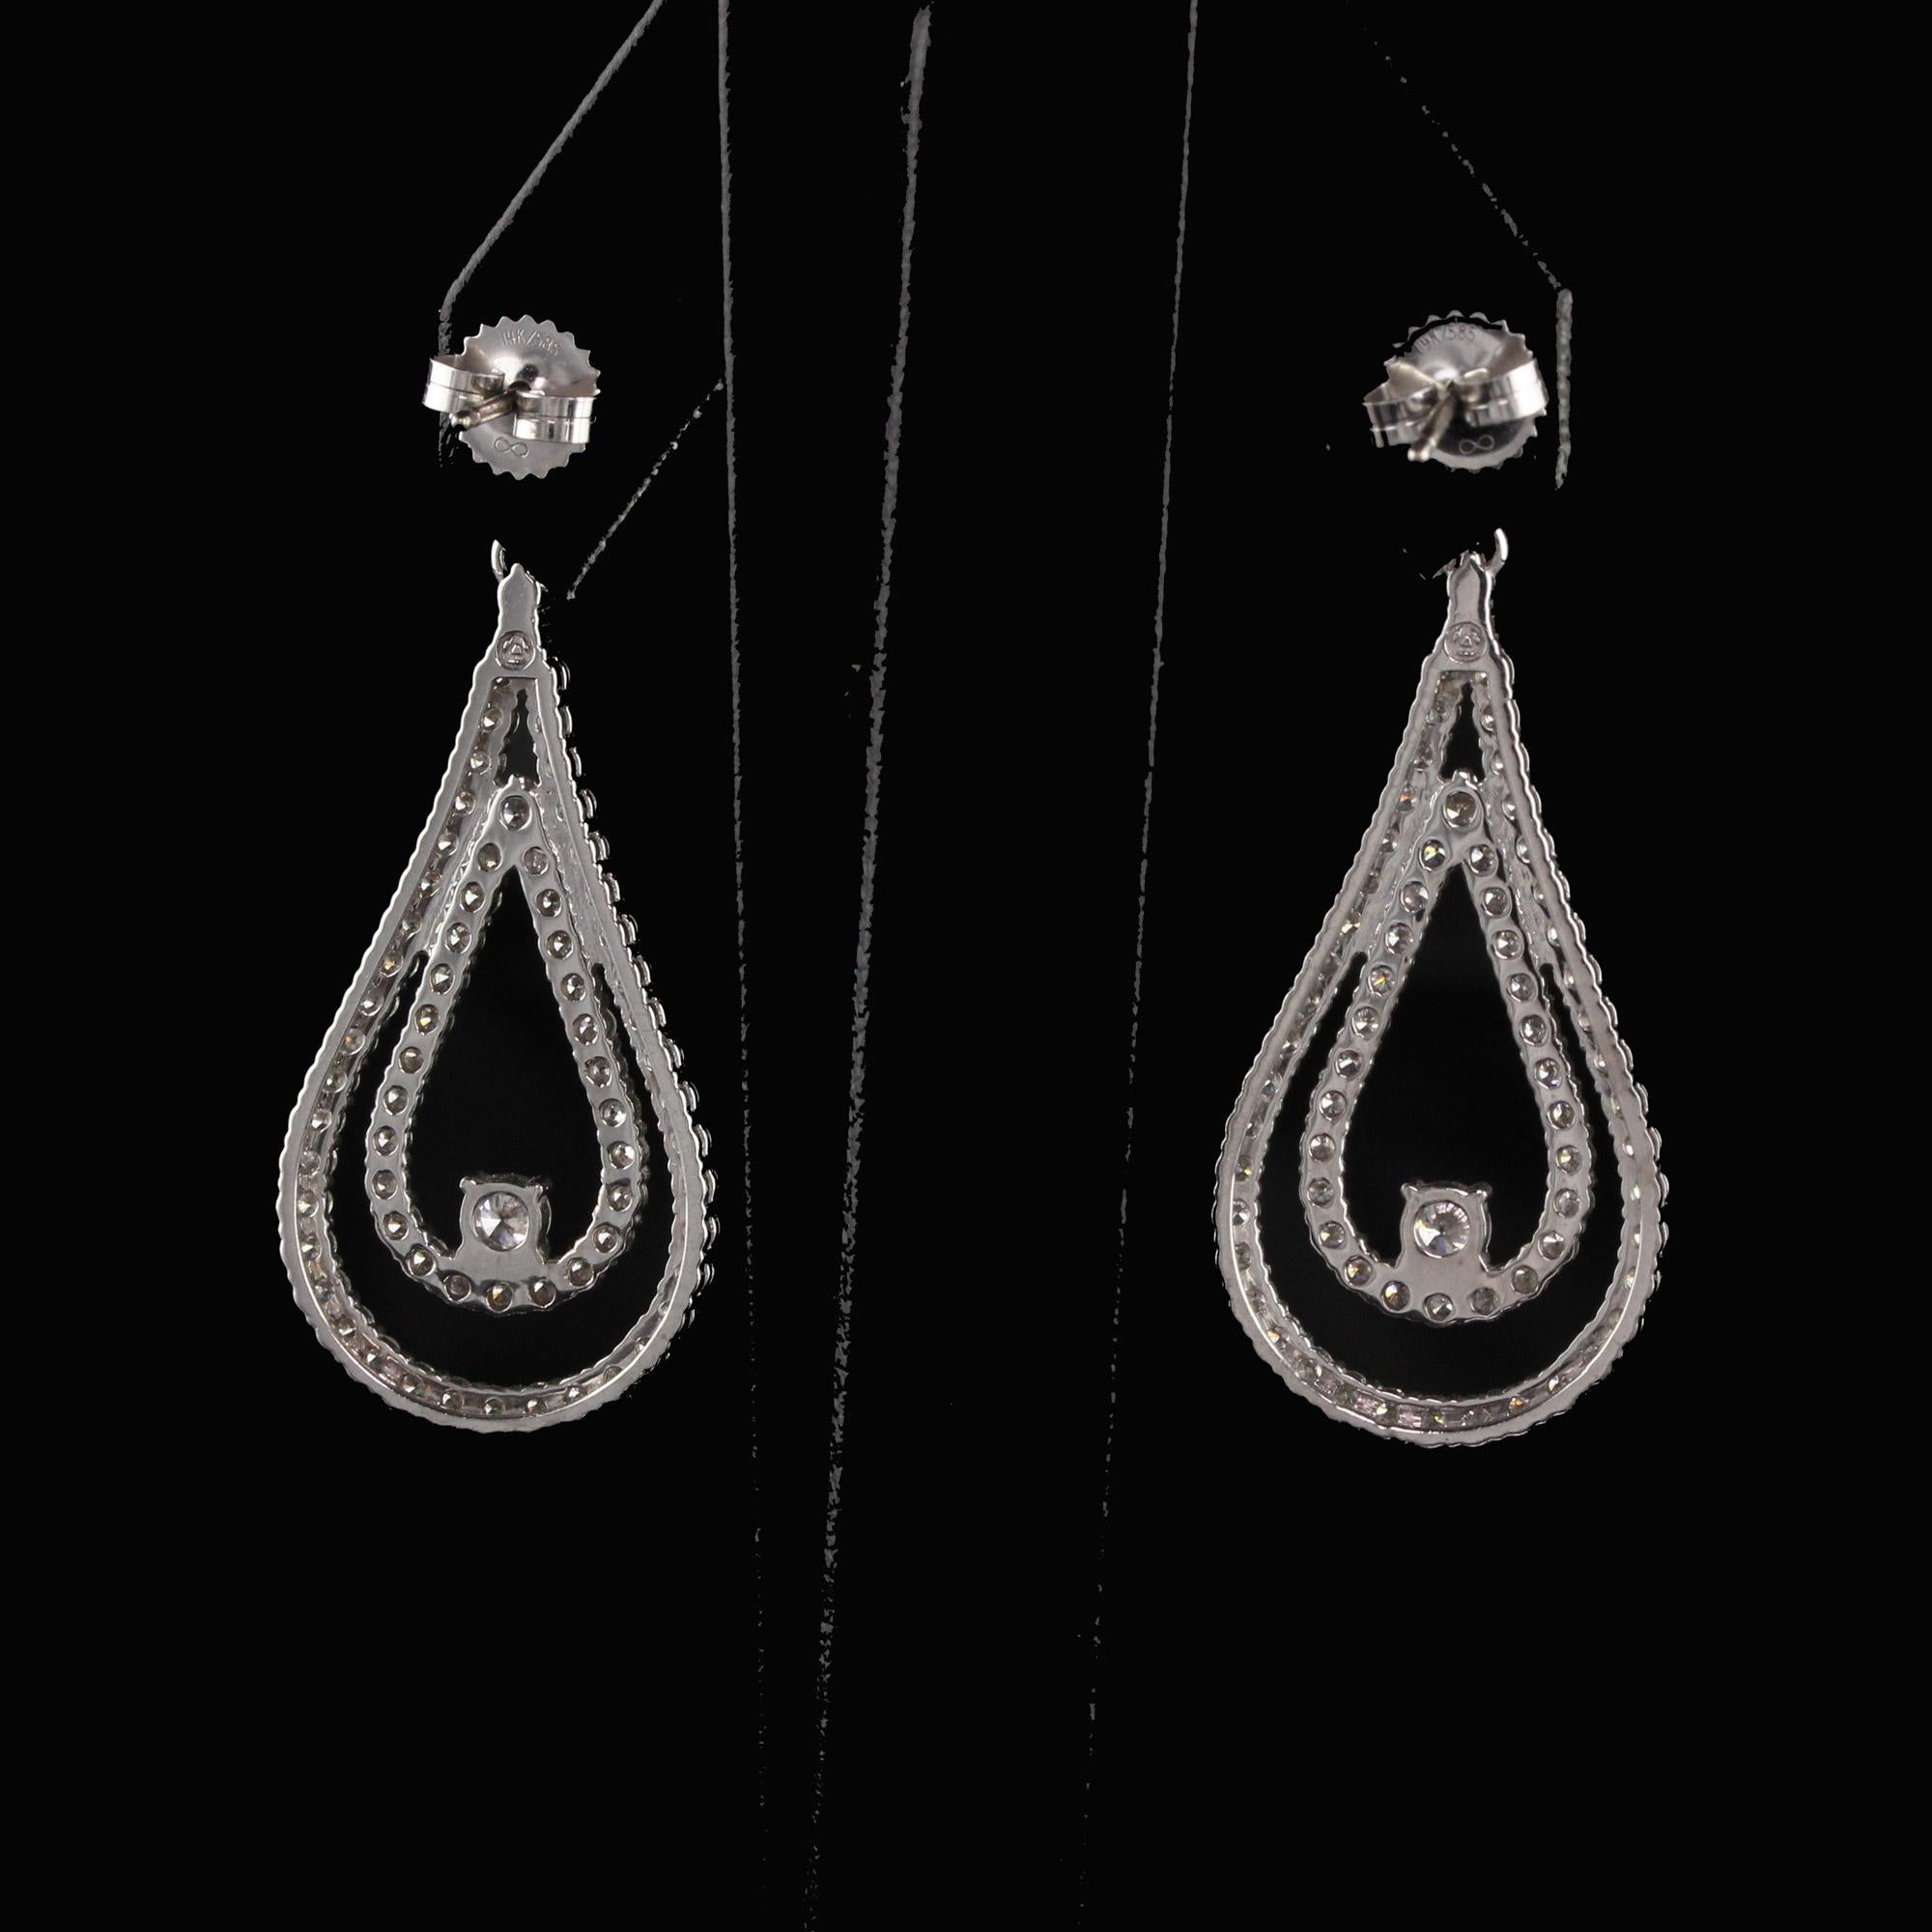 Vintage Estate 14 Karat White Gold Diamond Earrings In Excellent Condition For Sale In Great Neck, NY